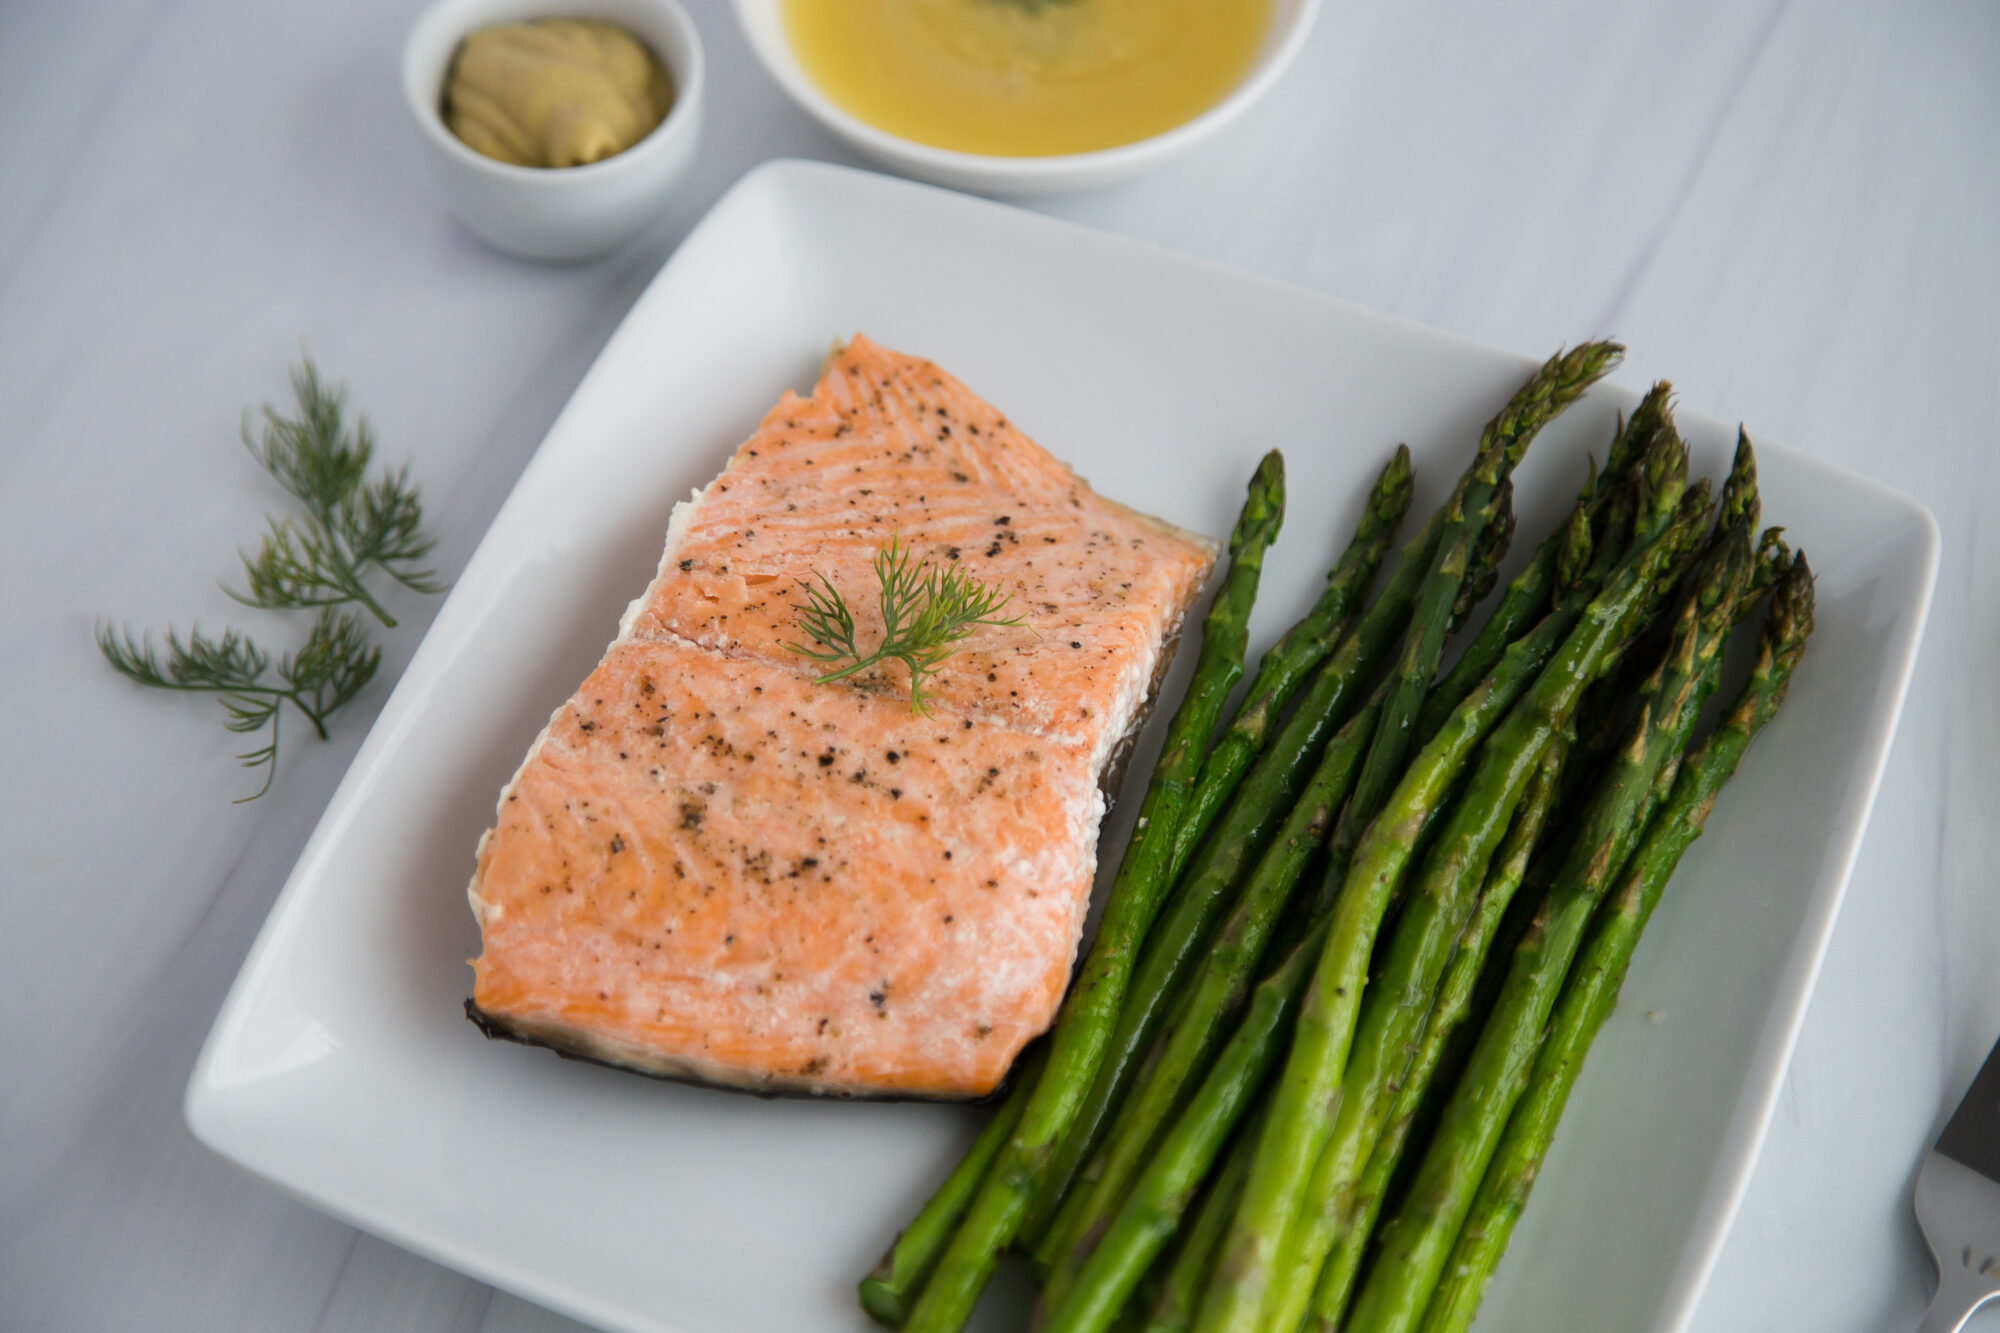 Asparagus spears and salmon on white plate. Side dish of dipping sauce.